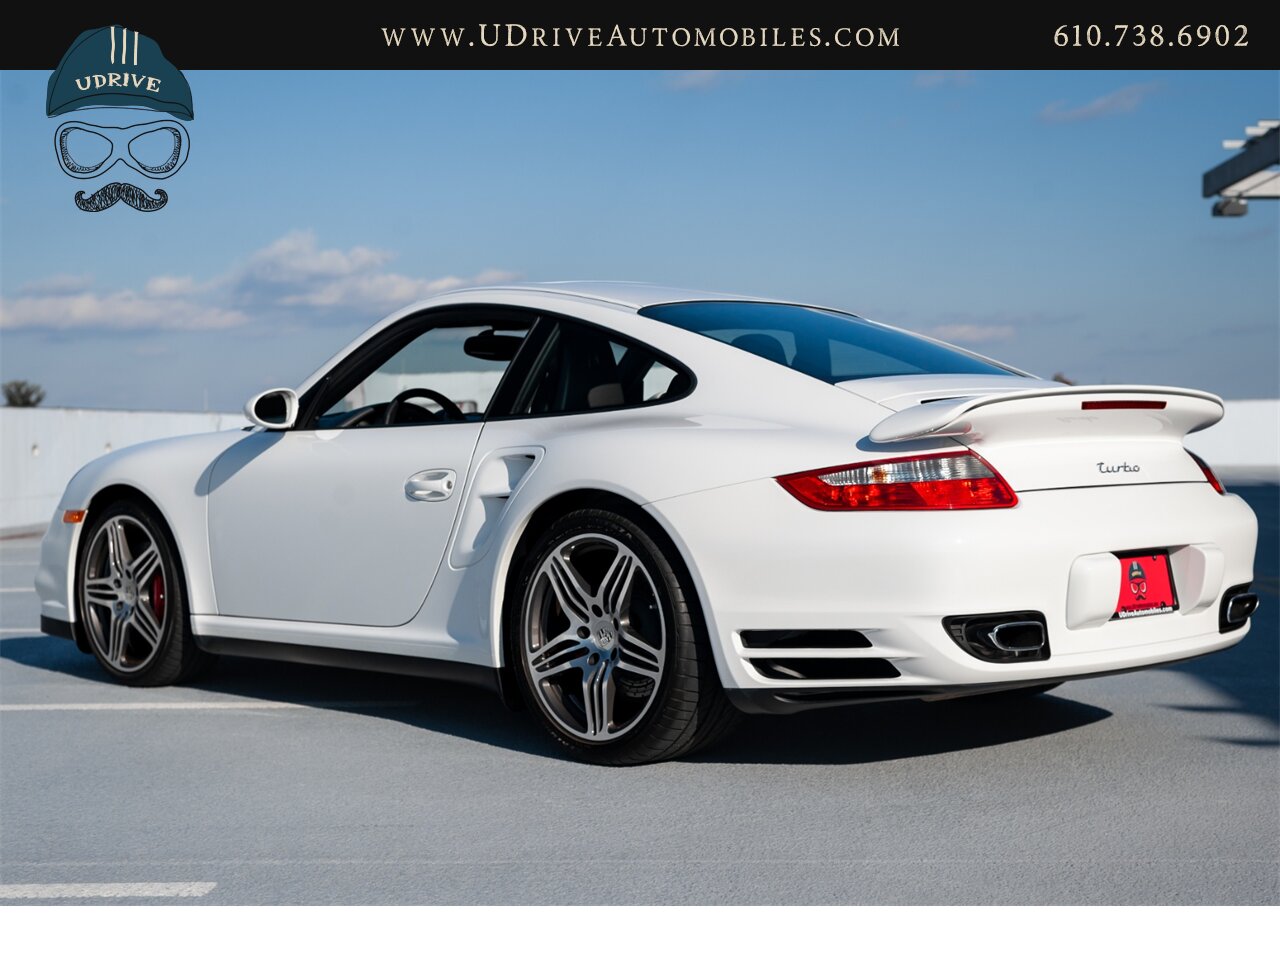 2007 Porsche 911 Turbo 642 Miles 1 Owner Carrara White 997  Sport Chrono Adaptive Sport Seats All Documentation from New - Photo 19 - West Chester, PA 19382